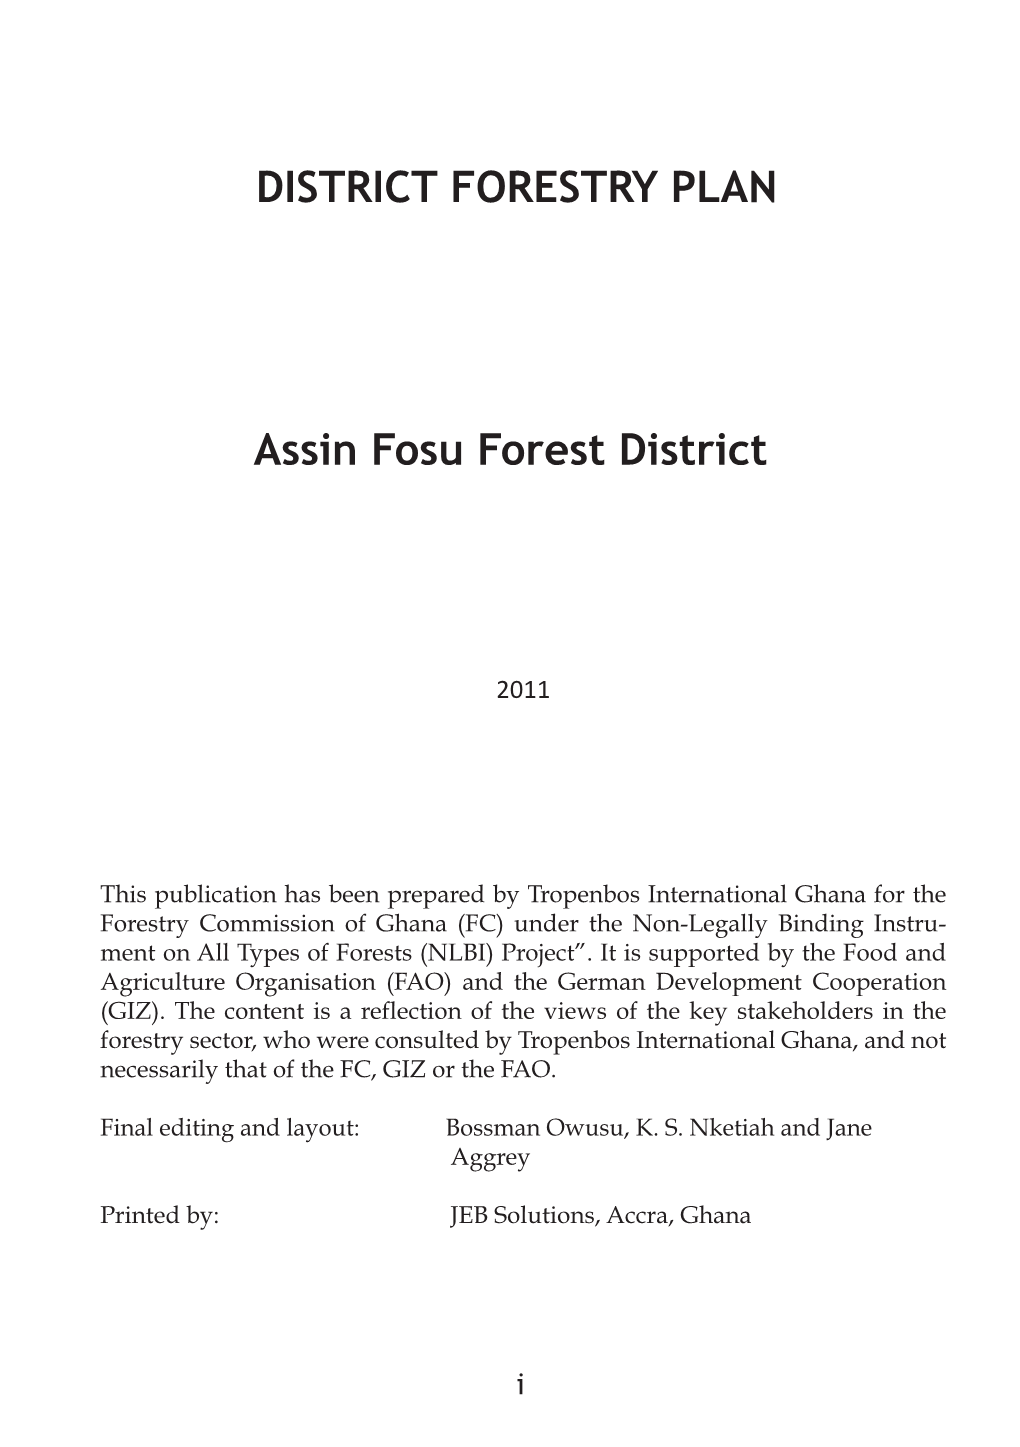 DISTRICT FORESTRY PLAN Assin Fosu Forest District